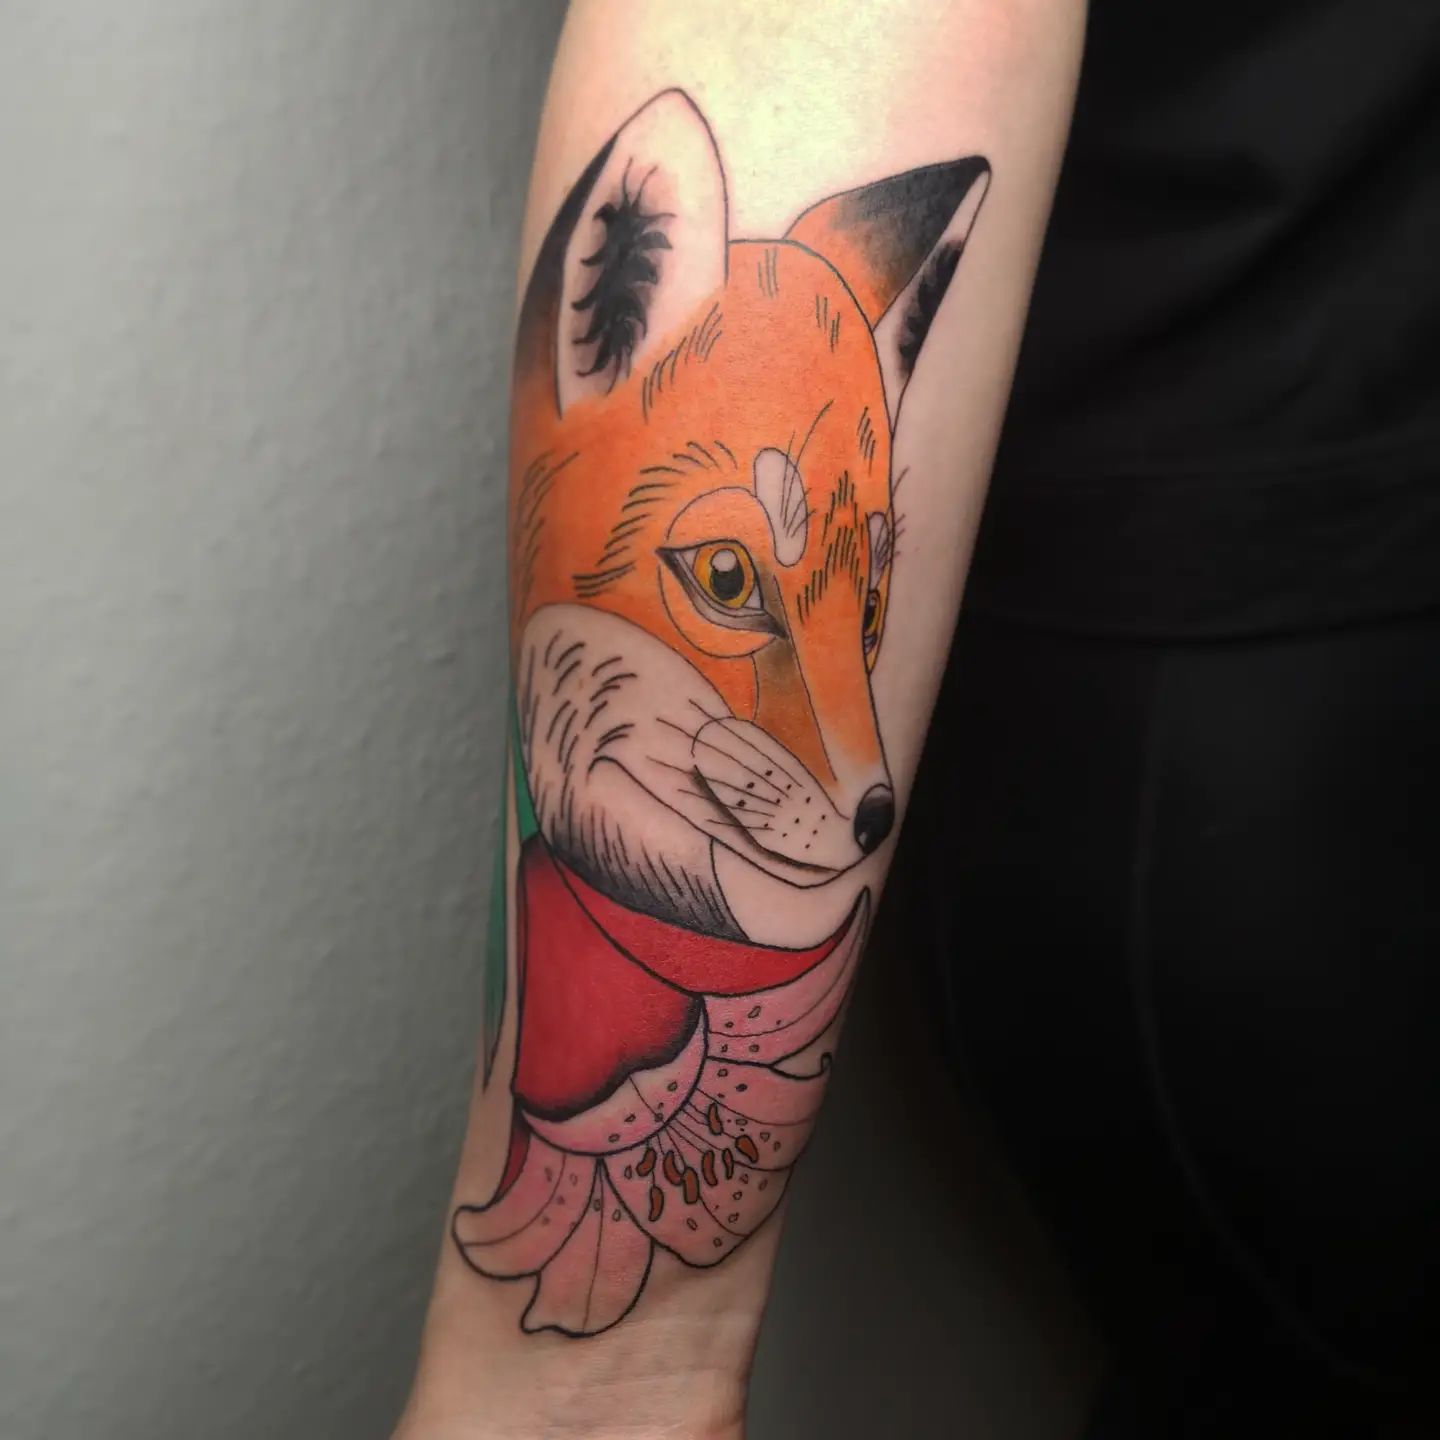 Lily and fox tattoo is a type of tattoo that has its roots in Japanese mythology. The fox is often depicted as a trickster, which can be seen as the opposite of lilies, which are considered to be symbols of purity and light.